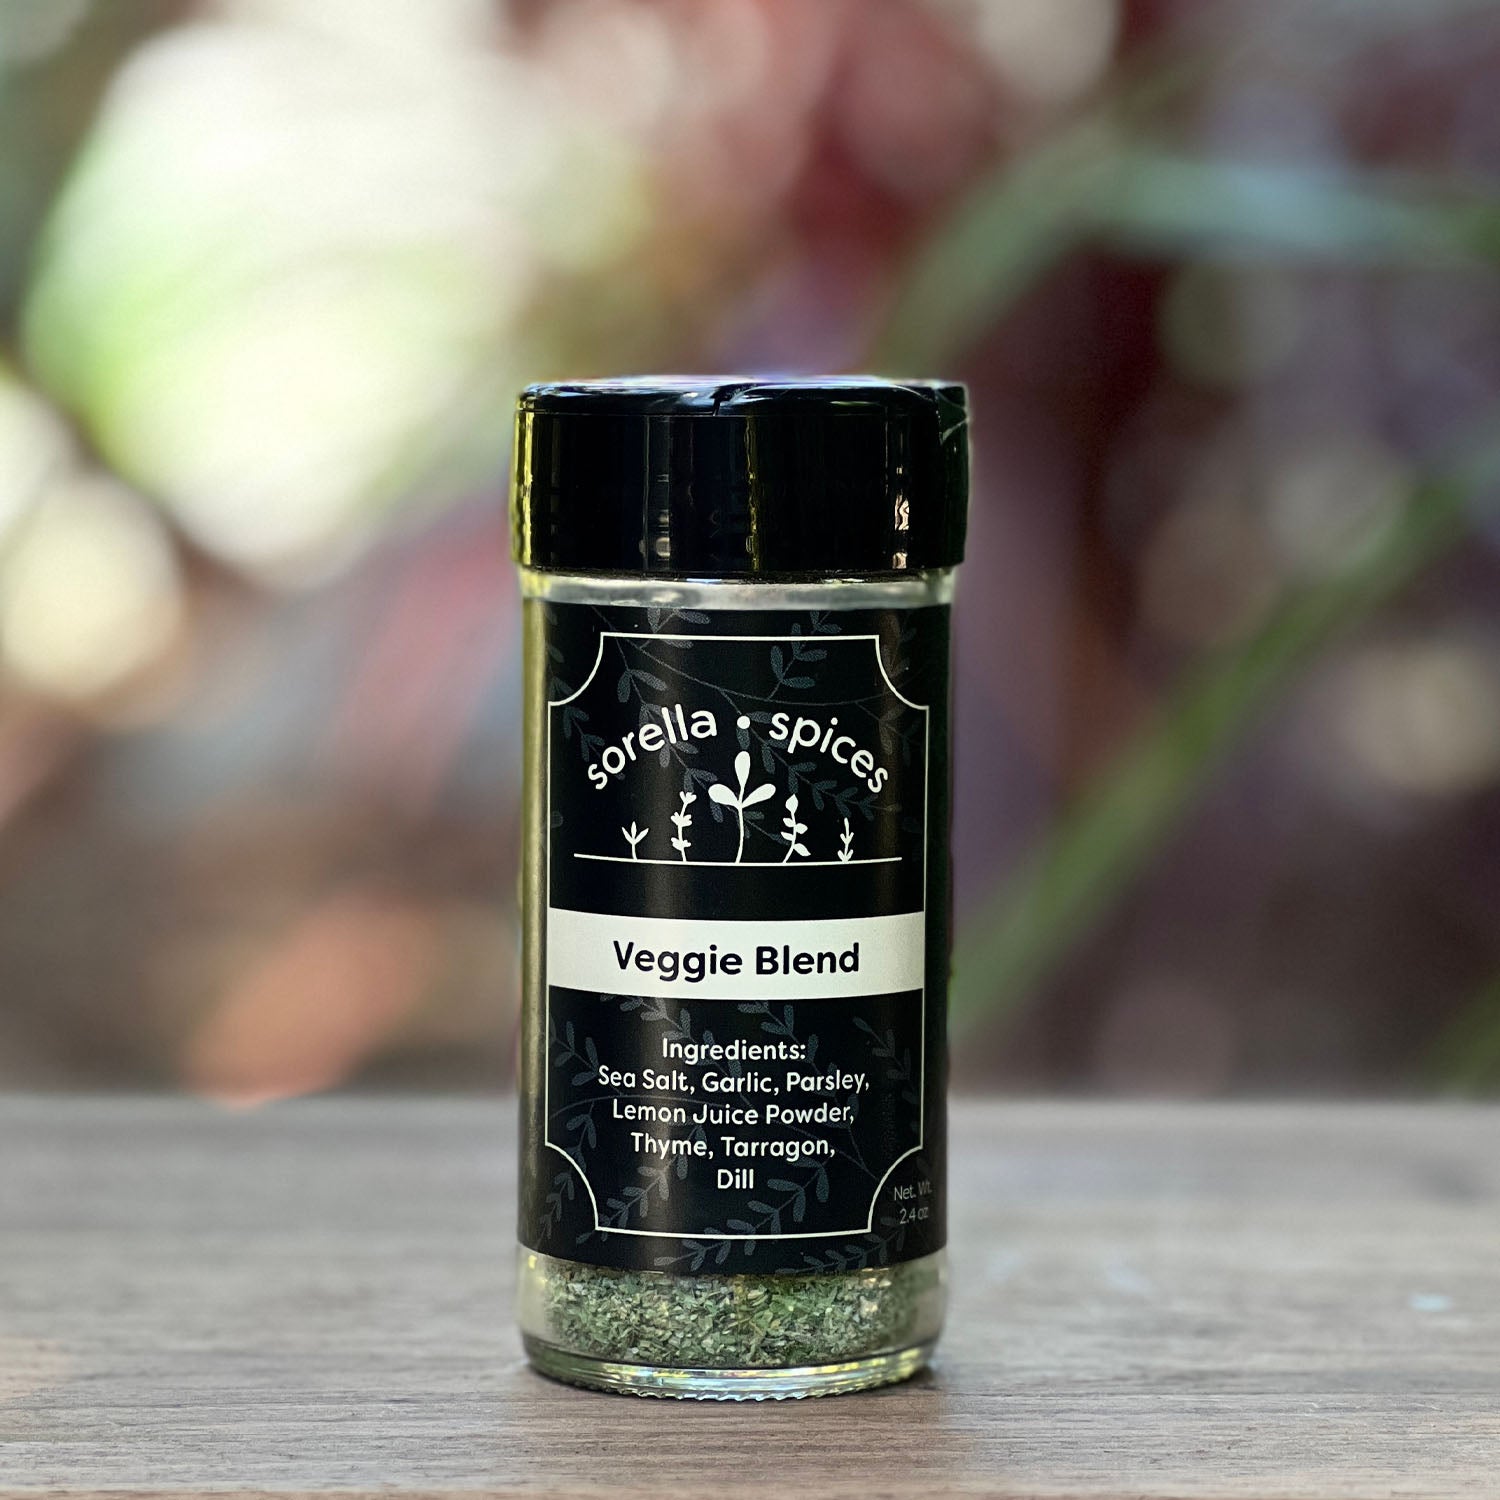 Sorella Spice Veggie Blend mix of herb and citrus blend perfect for all veggies.